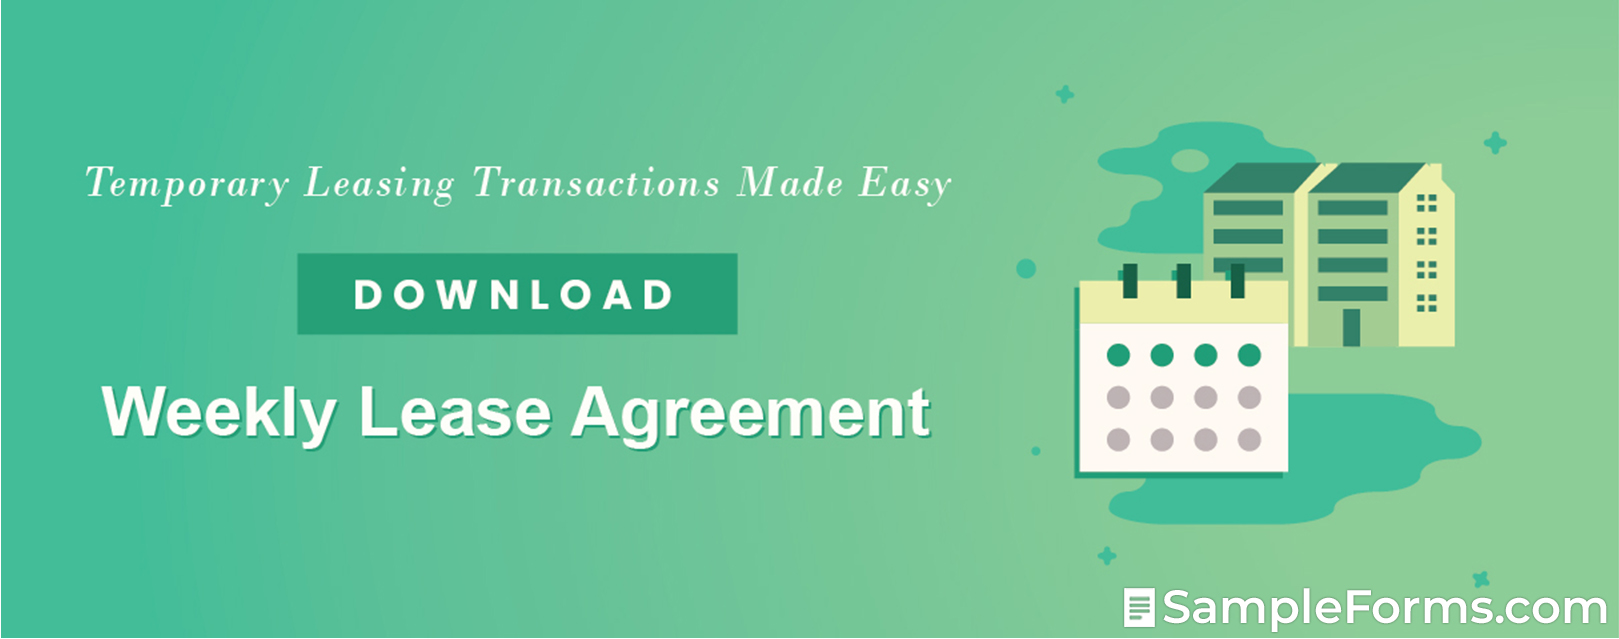 Weekly Lease Agreement1